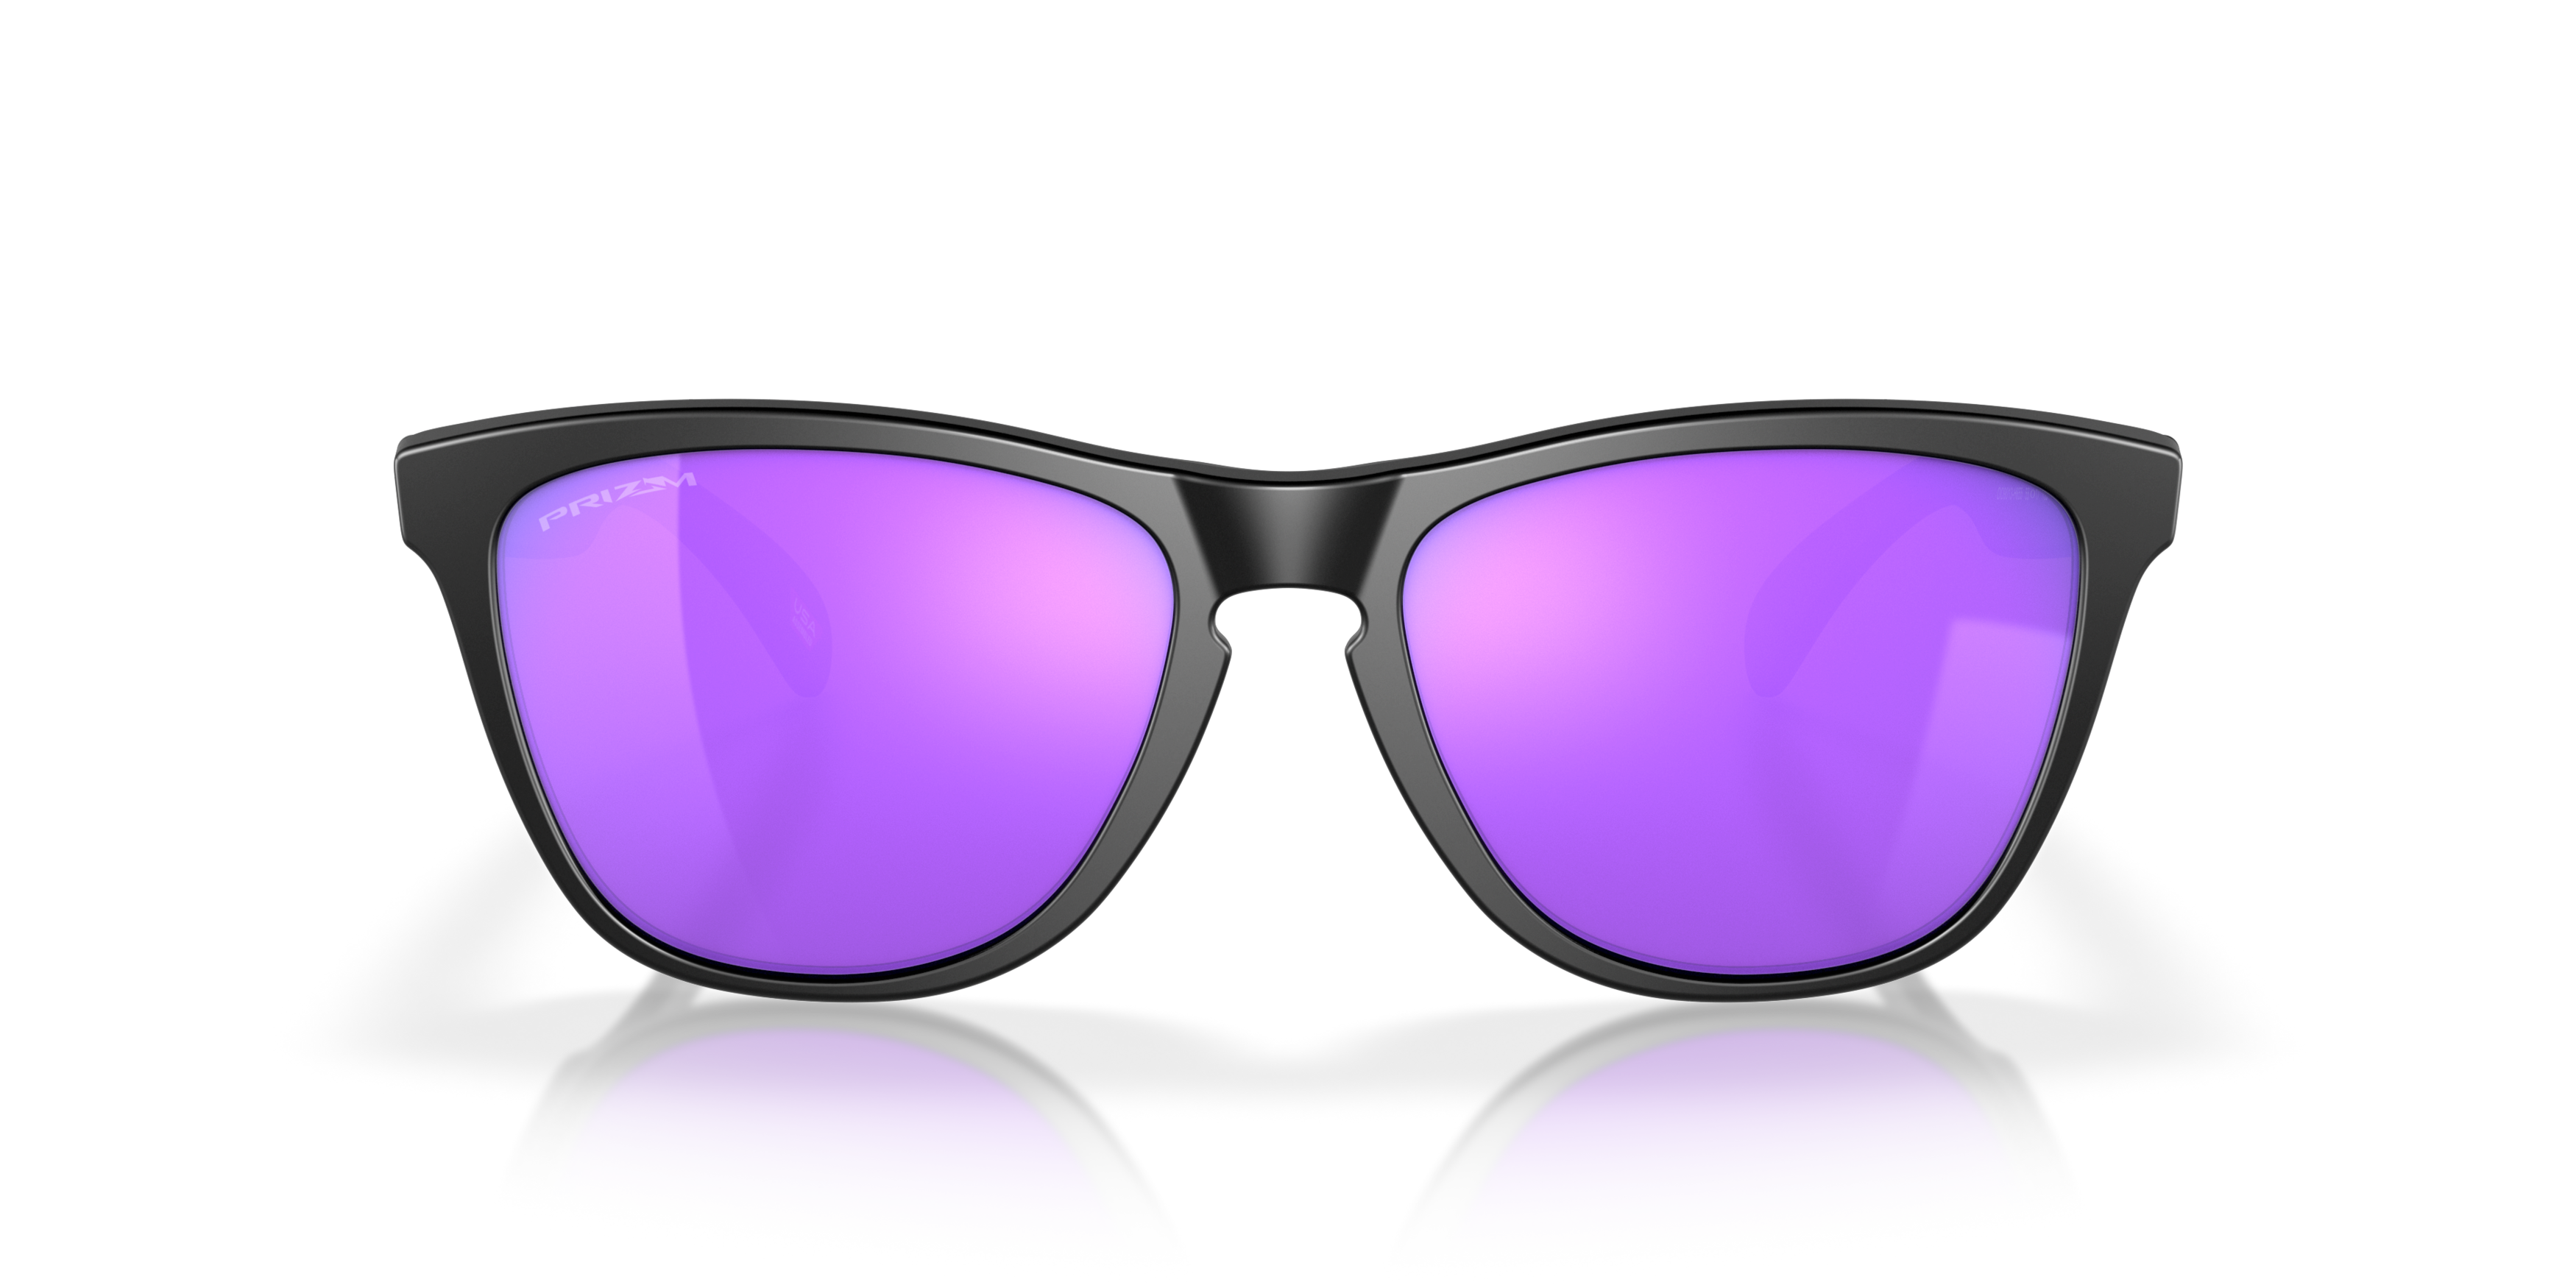 [products.image.front] Oakley 0OO9013 9013H6